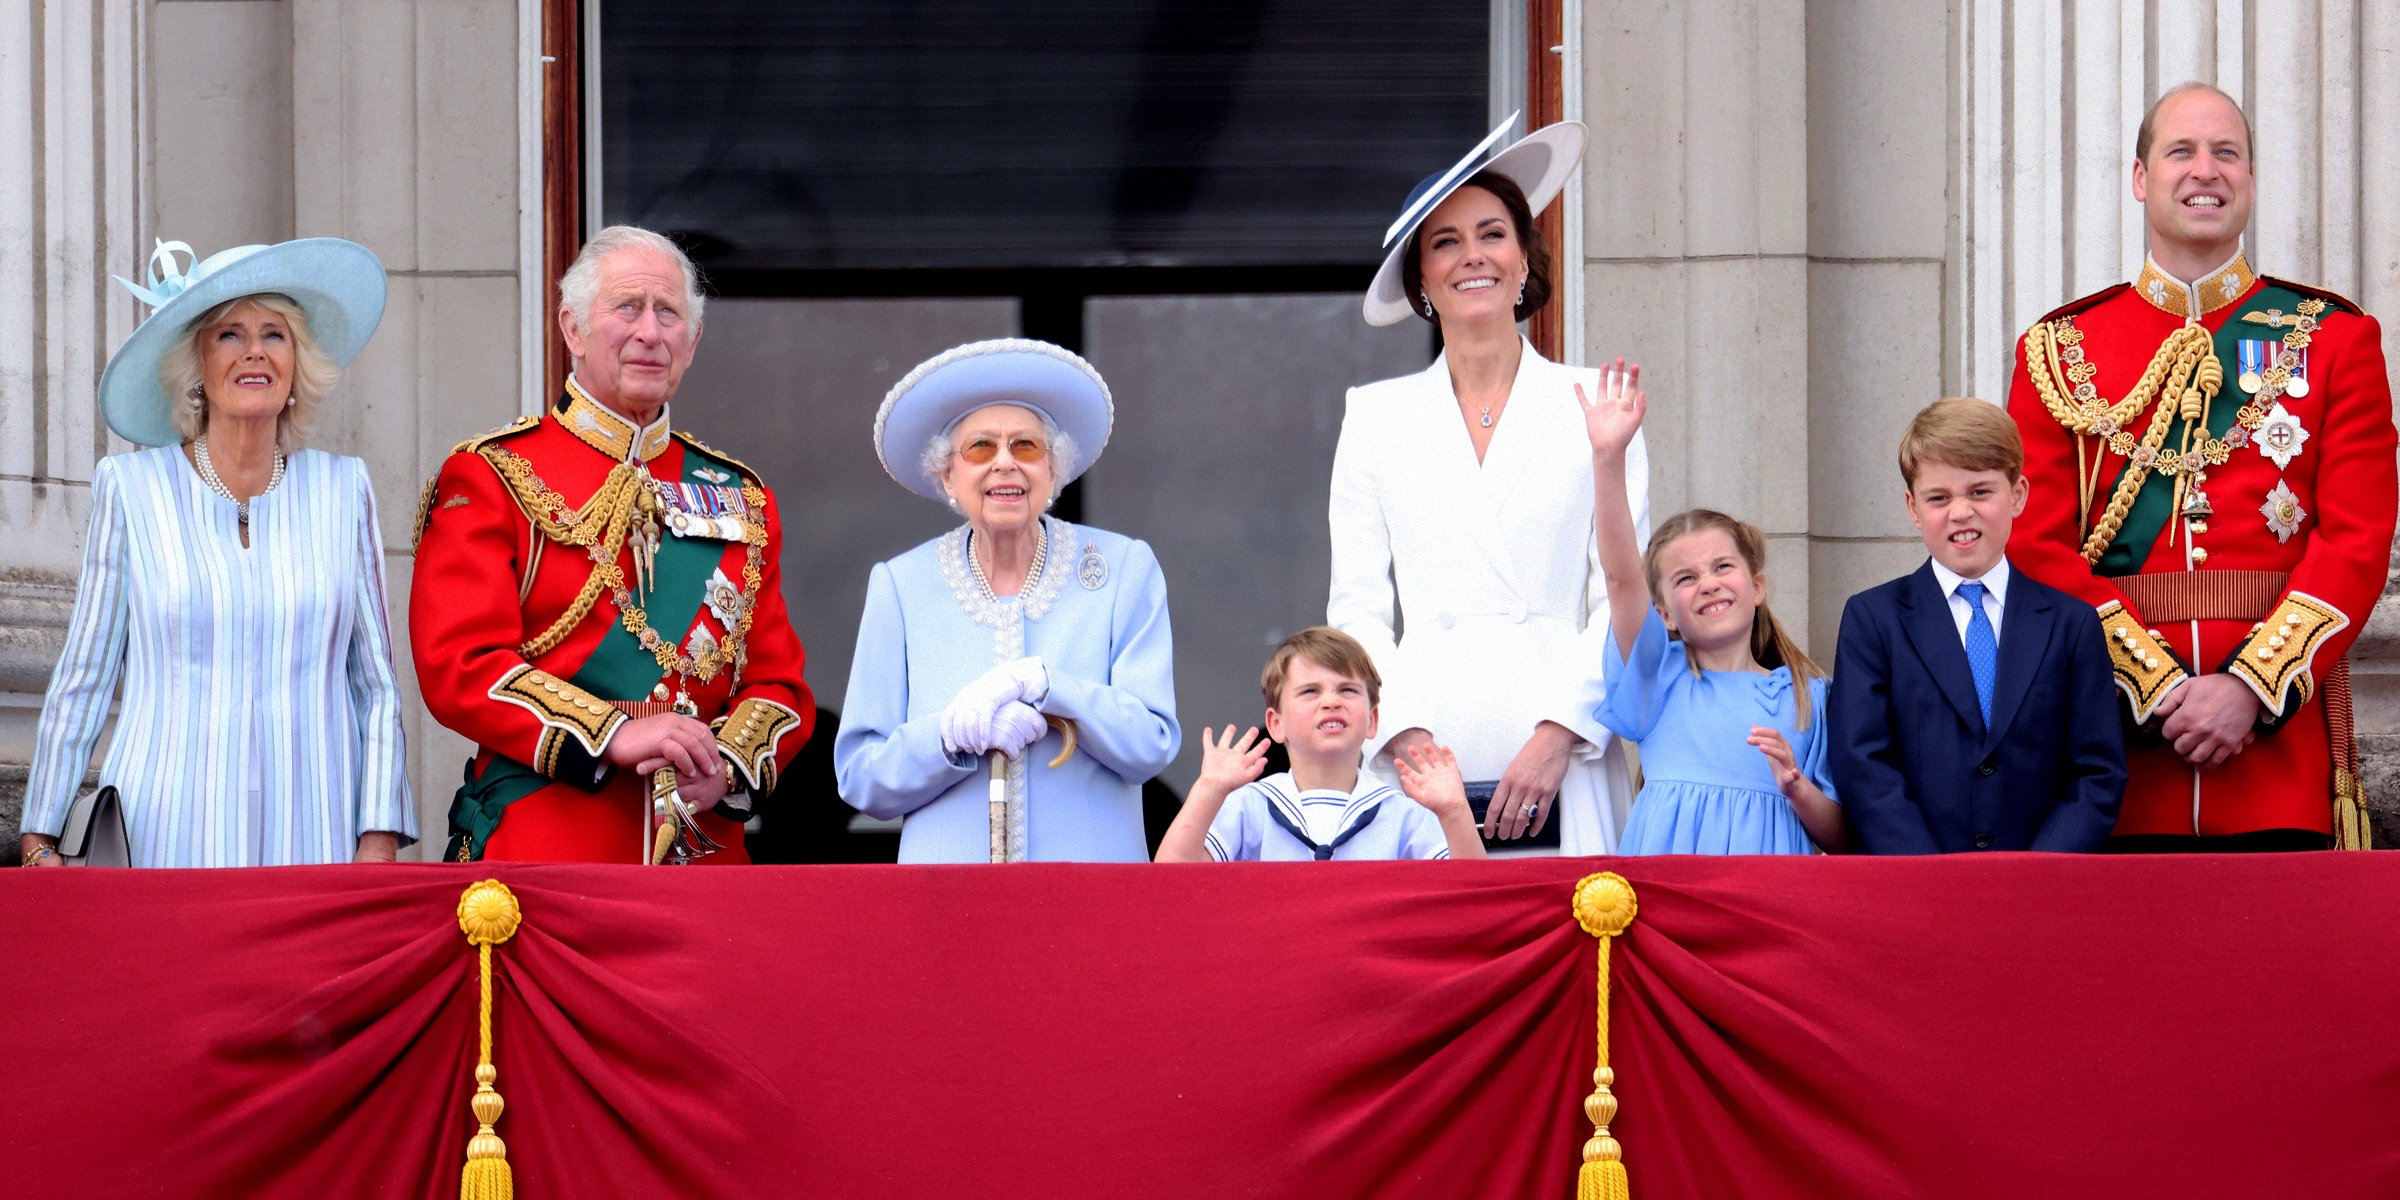 The Royal Family | Source: Getty Images